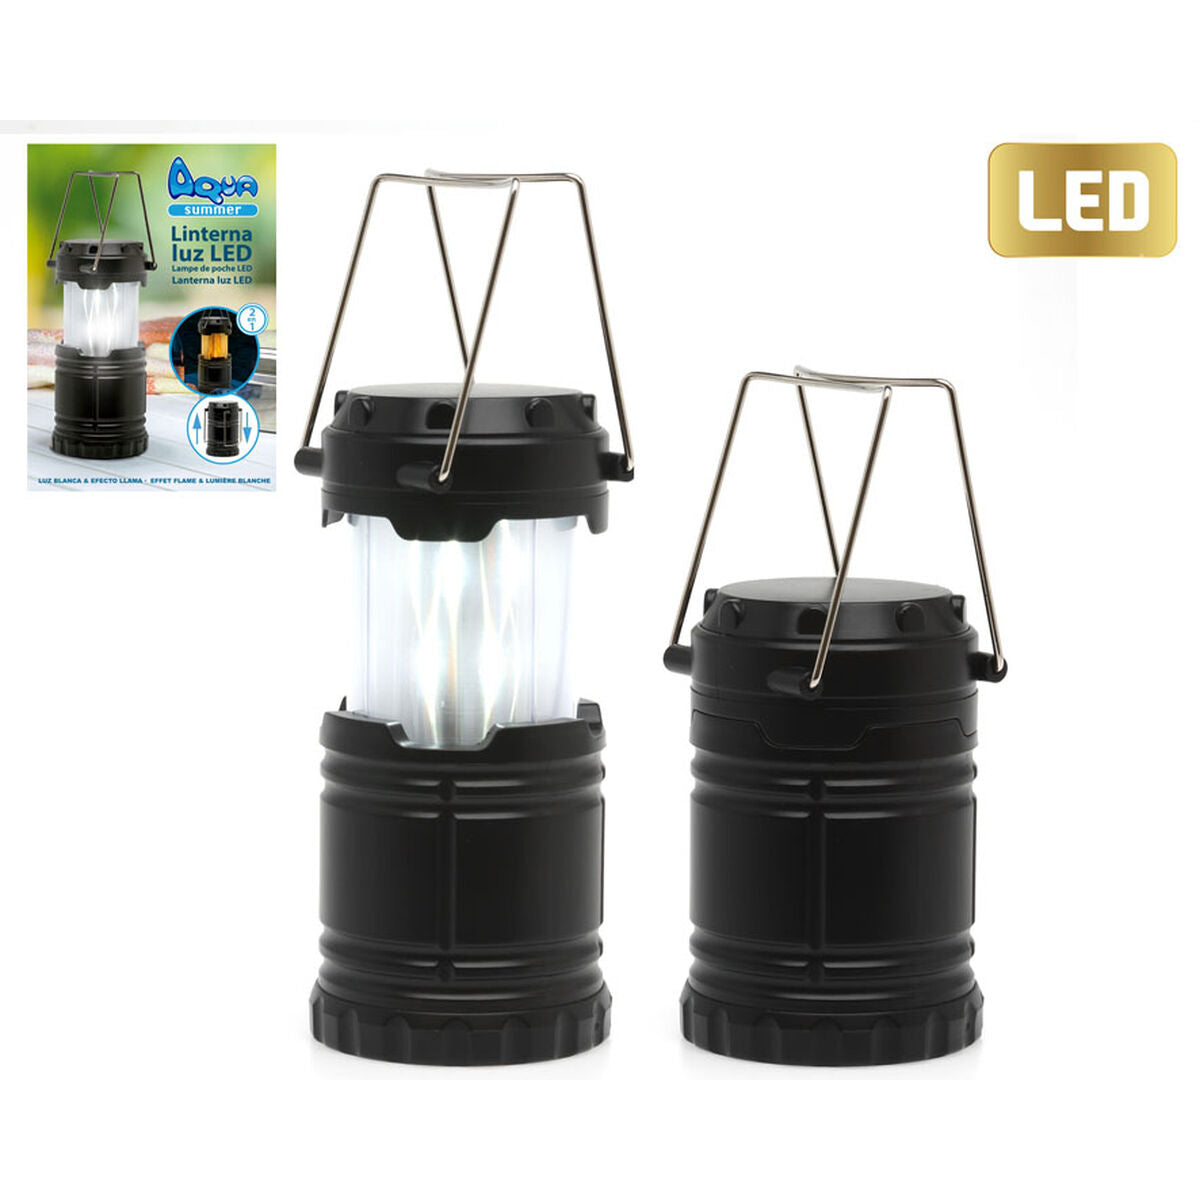 Extendierbare LED-Campinglampe mit Griffen